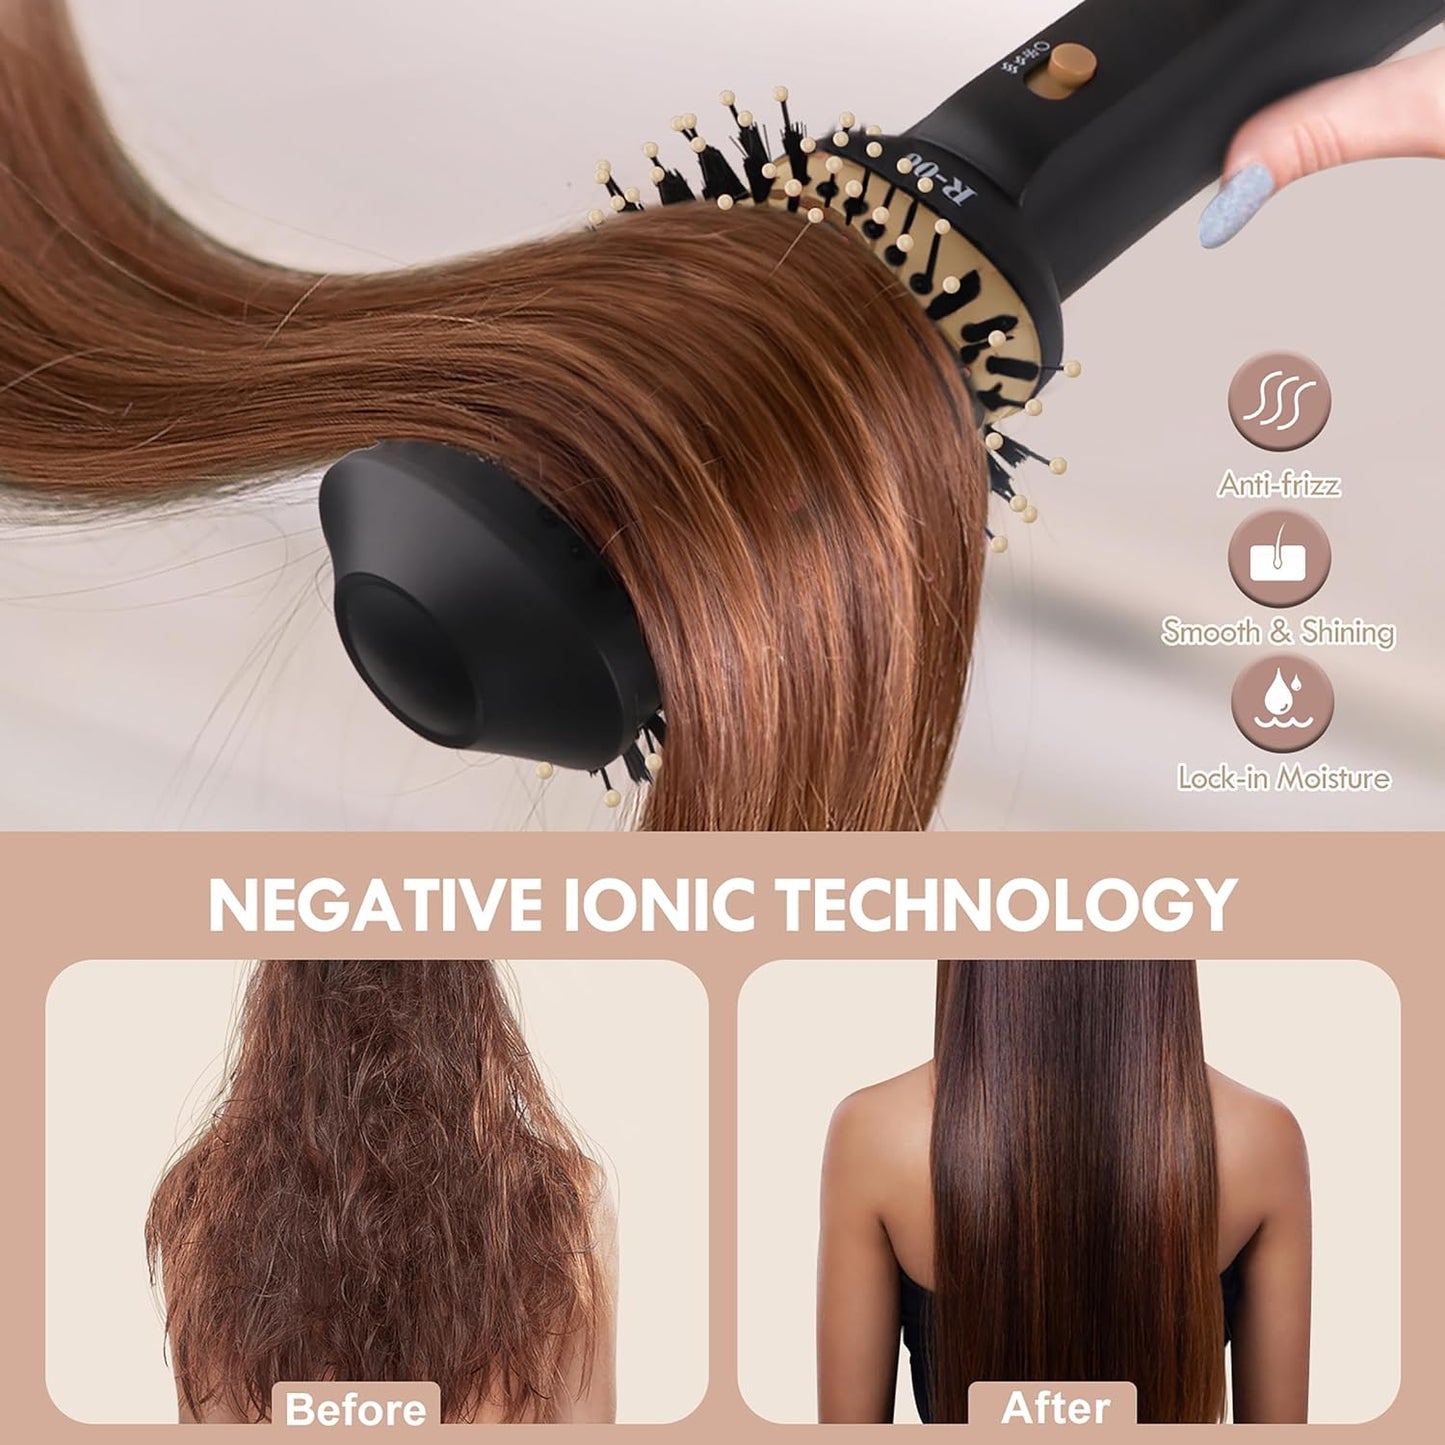 Hair Dryer Brush Blow Dryer Brush in One, 4 in 1 Hair Dryer and Styler Volumizer with Oval Barrel, Professional Salon Hot Air Brush for All Hair Types hair dryer hair dryer brush blow dryer blow dryer brush brush blow dryer 